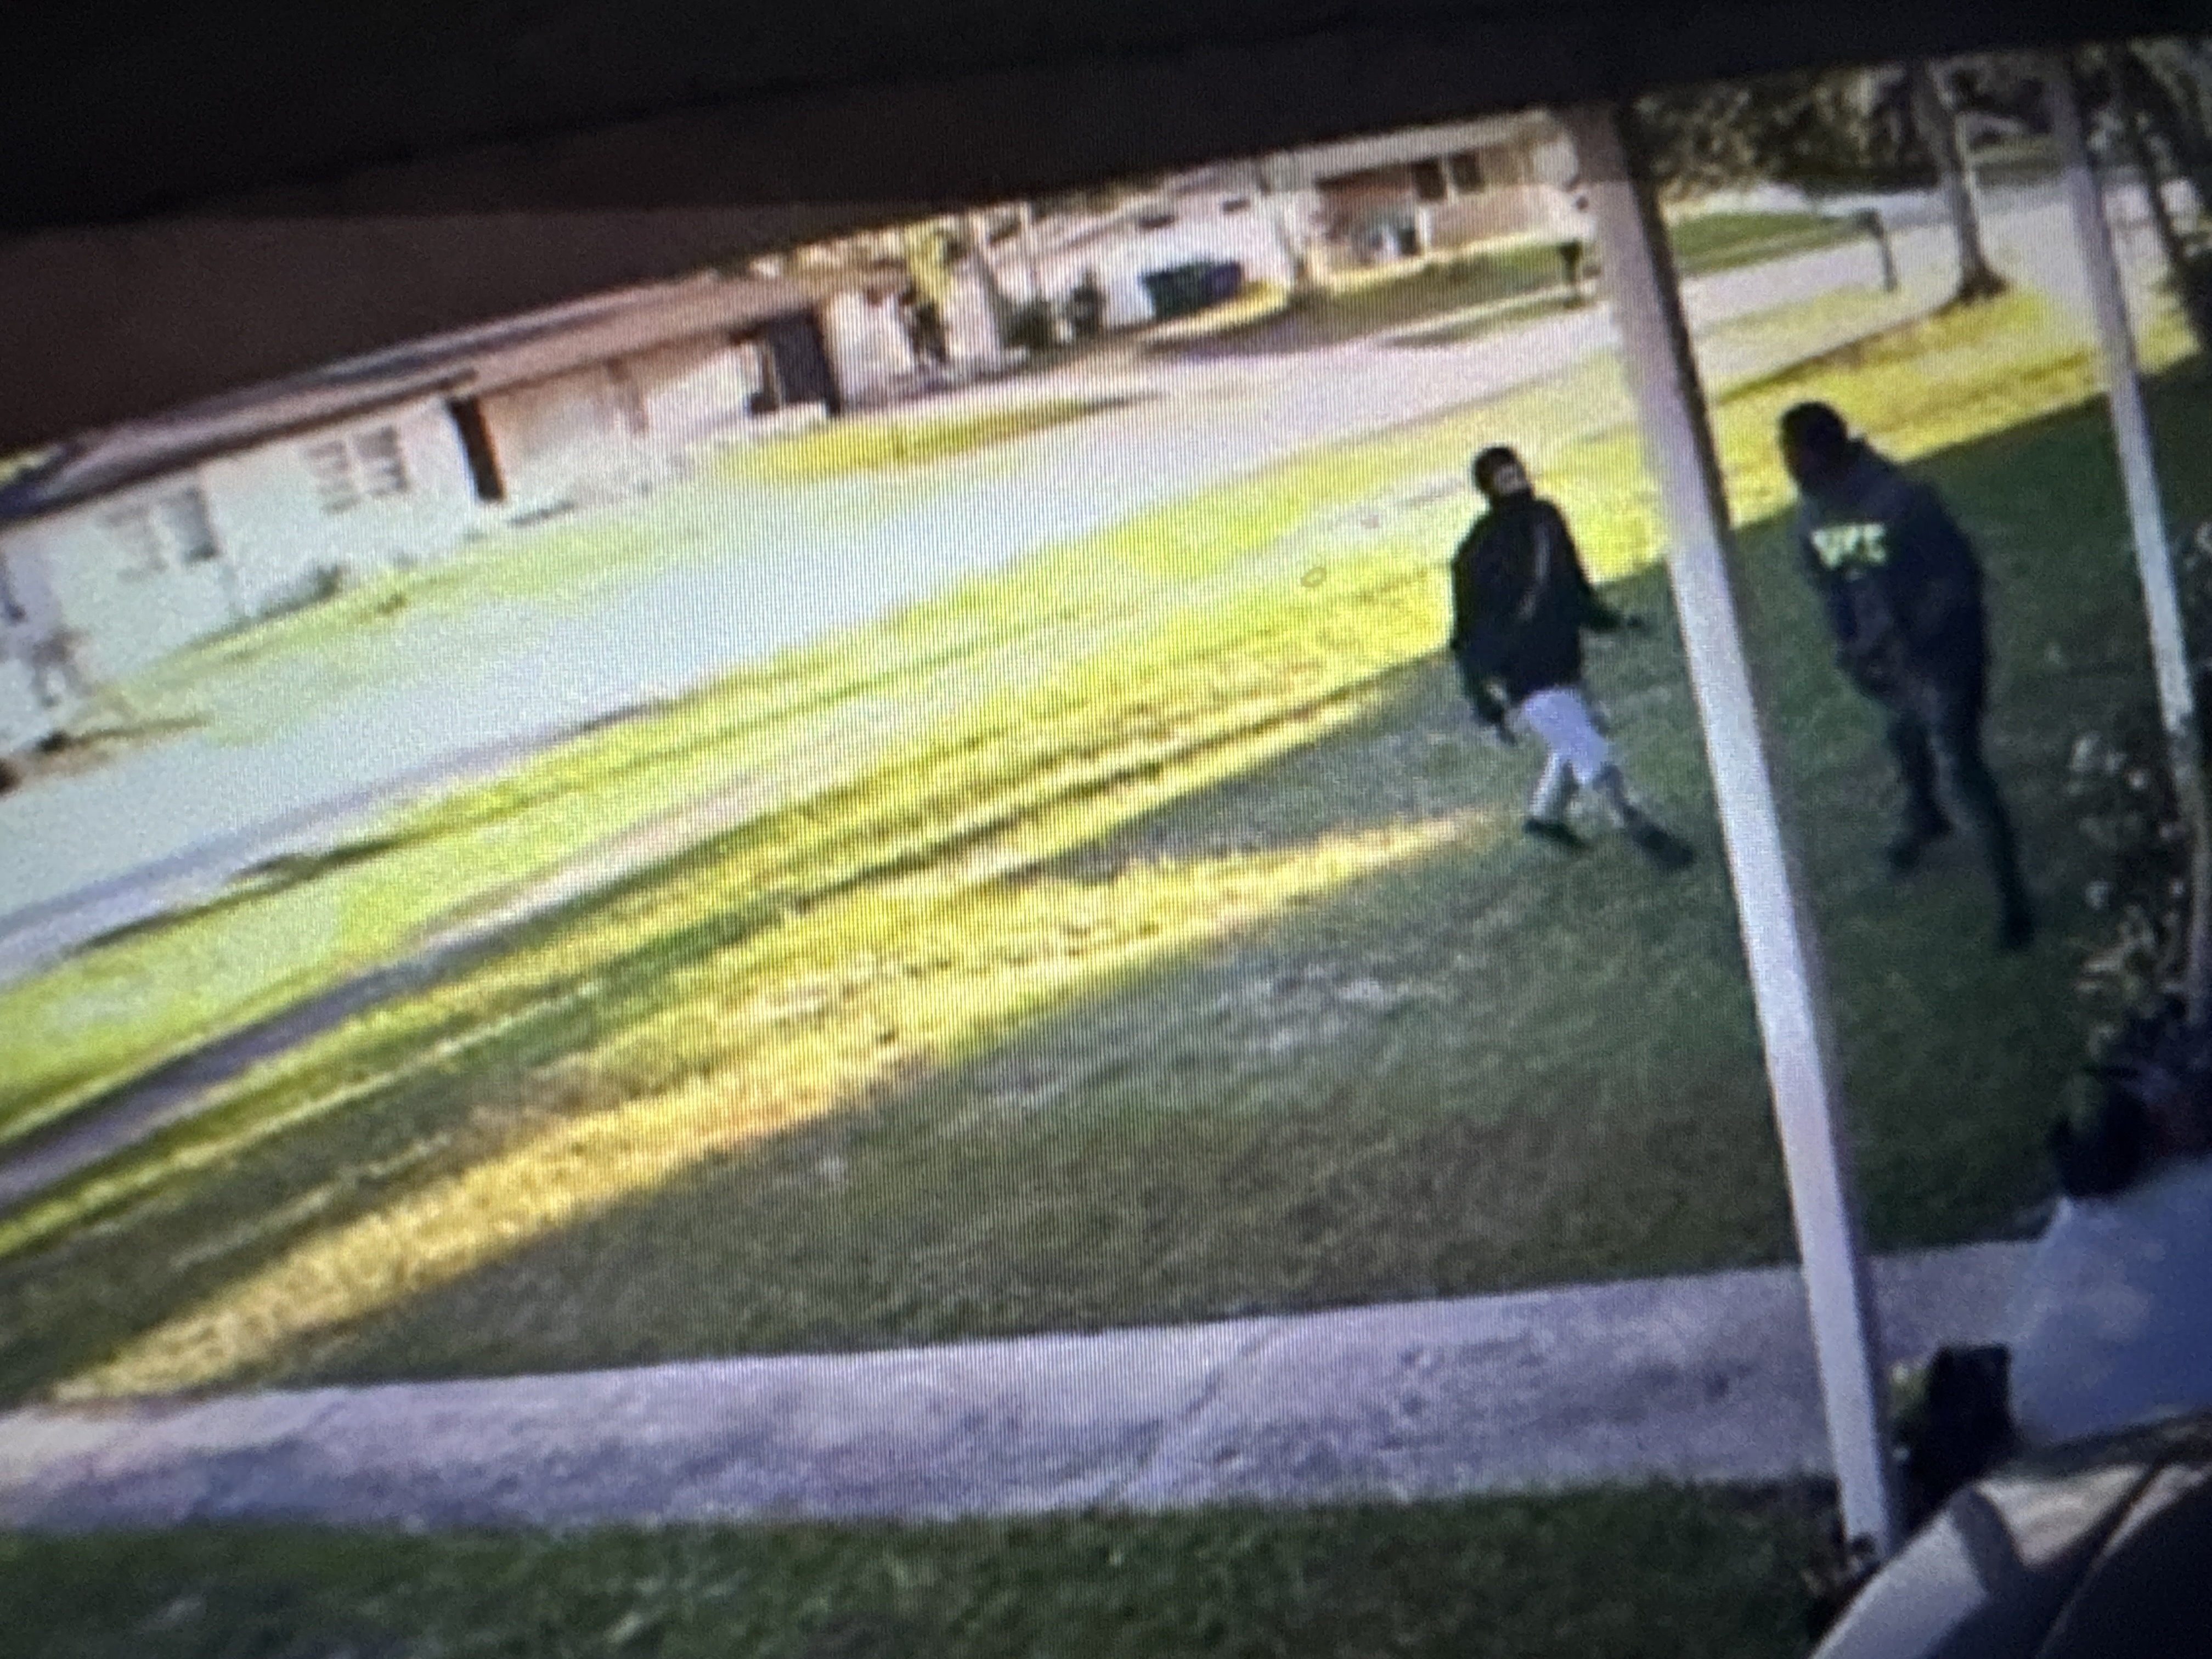 16-Year-Old Arrested For Pistol-Whipping, Shooting In Deltona Image